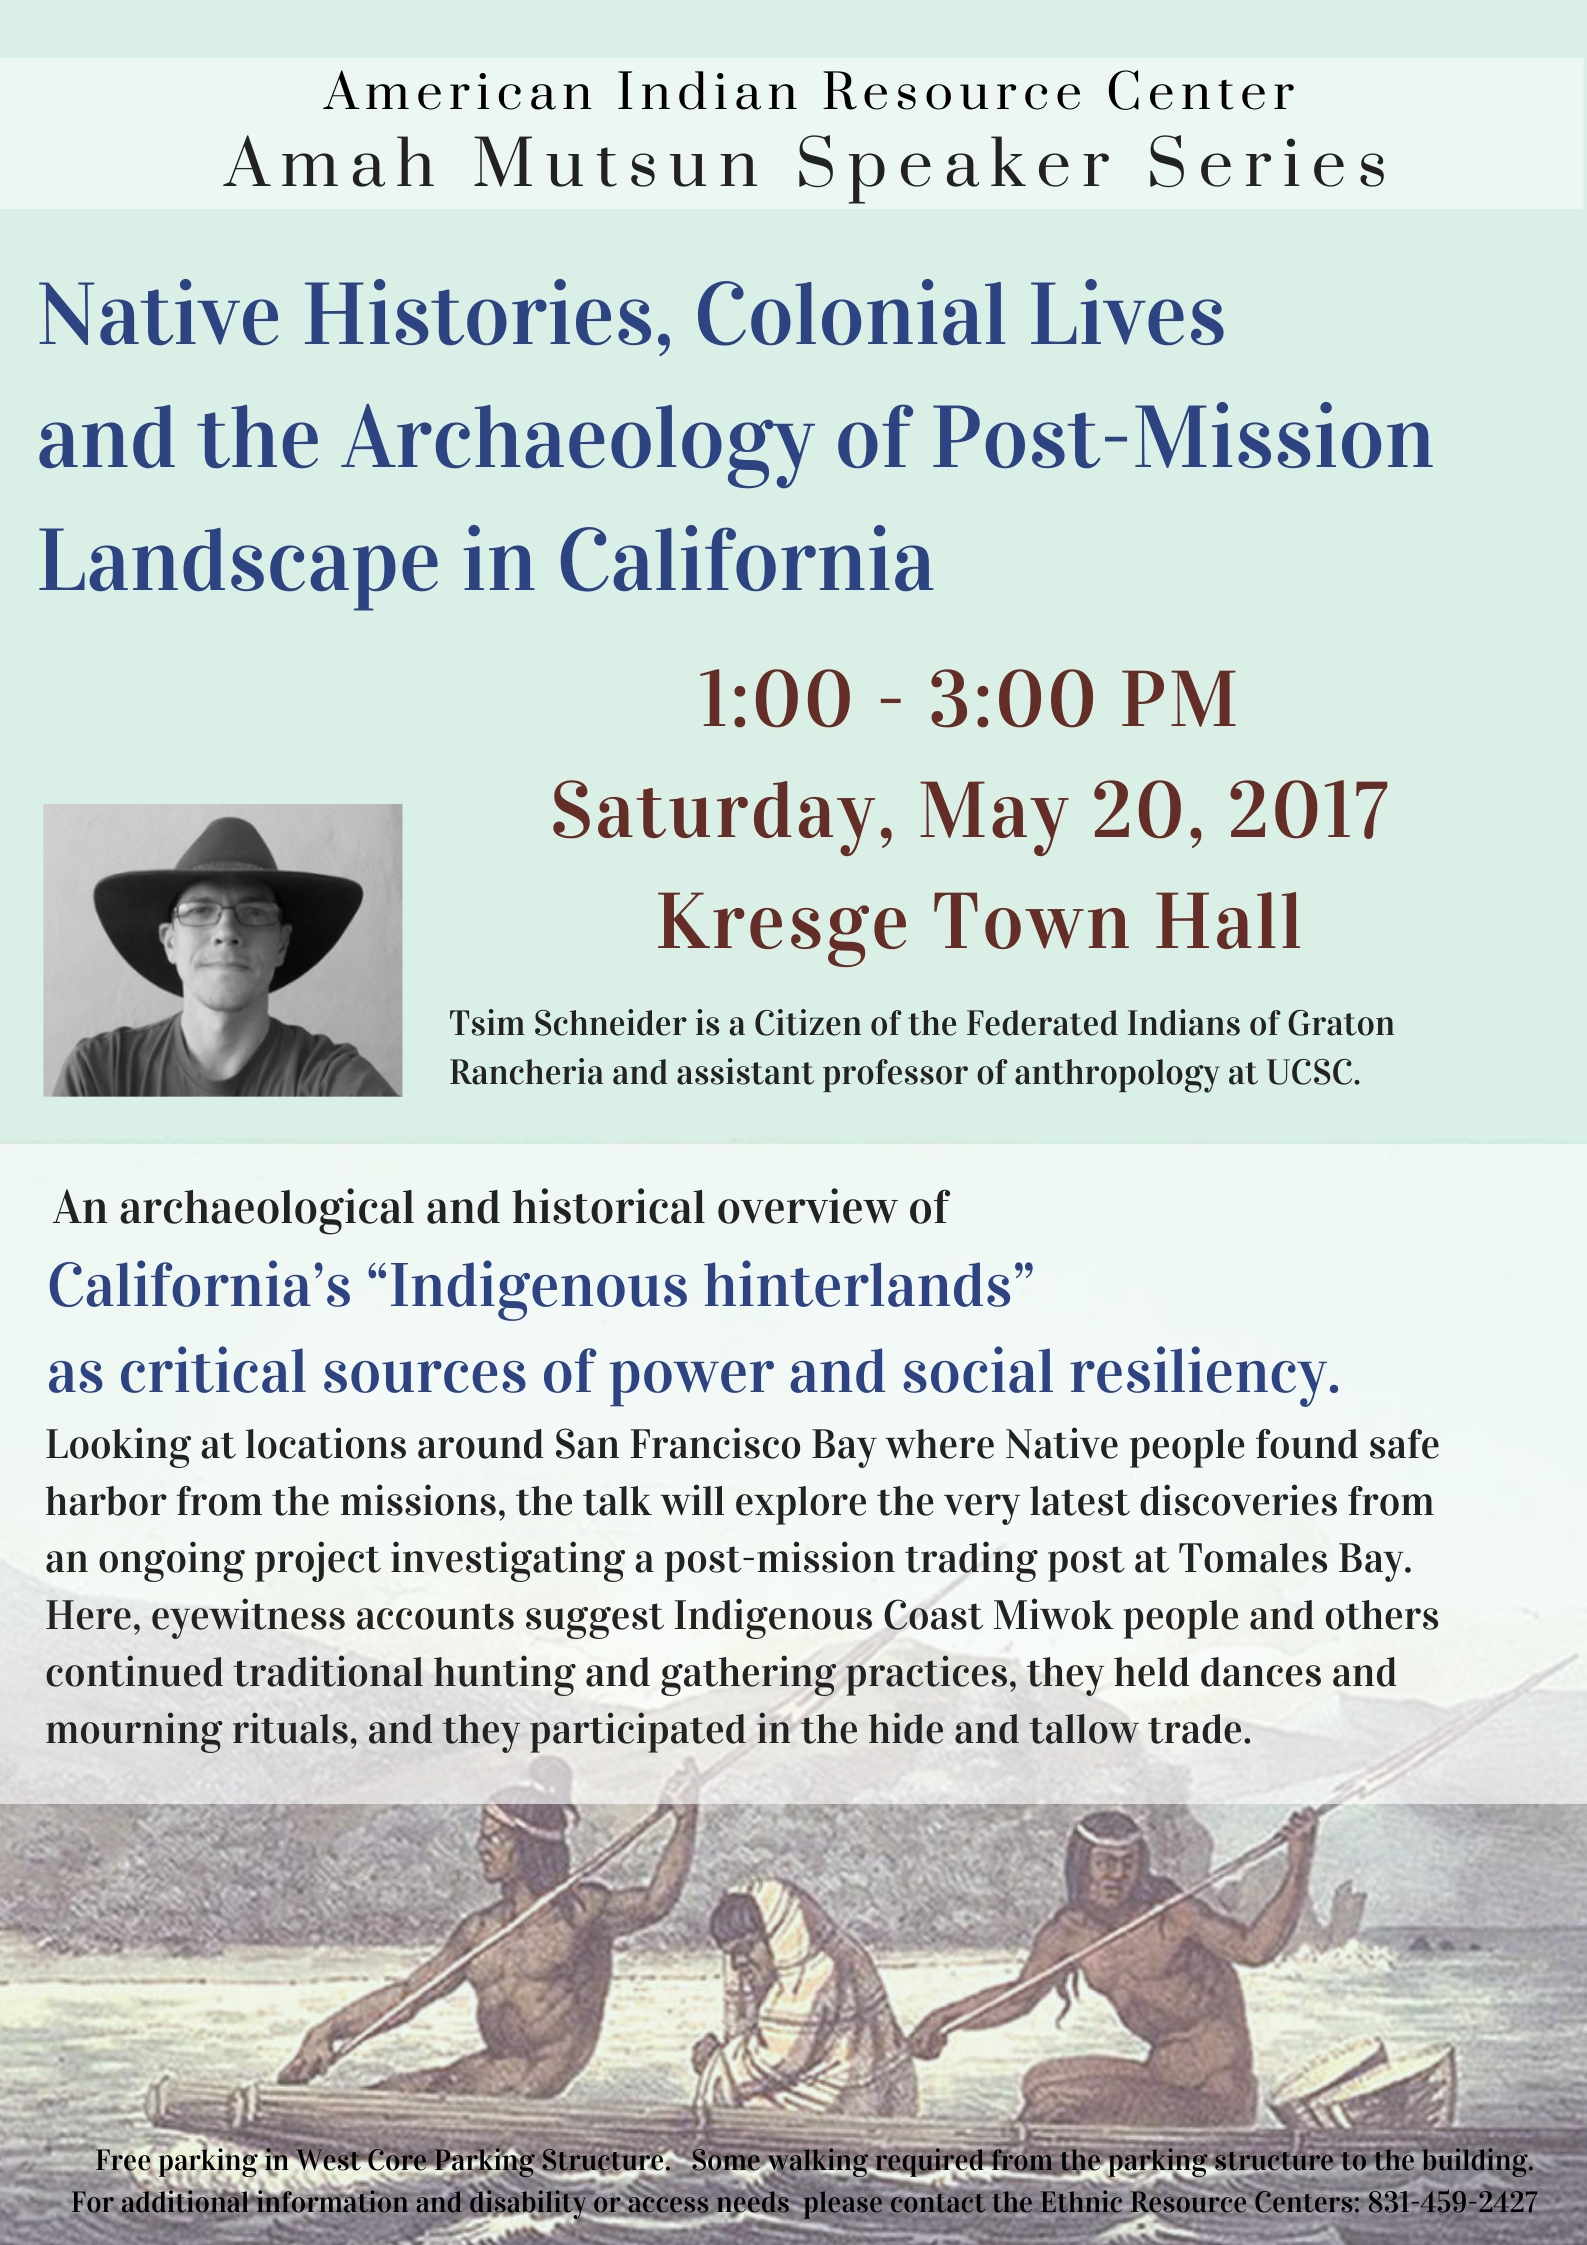 Amah Mutsun Speaker Series: Native Histories, Colonial Lives and the Archaeology of Post-Mission Landscape in California with Professor Tsim Schneider 